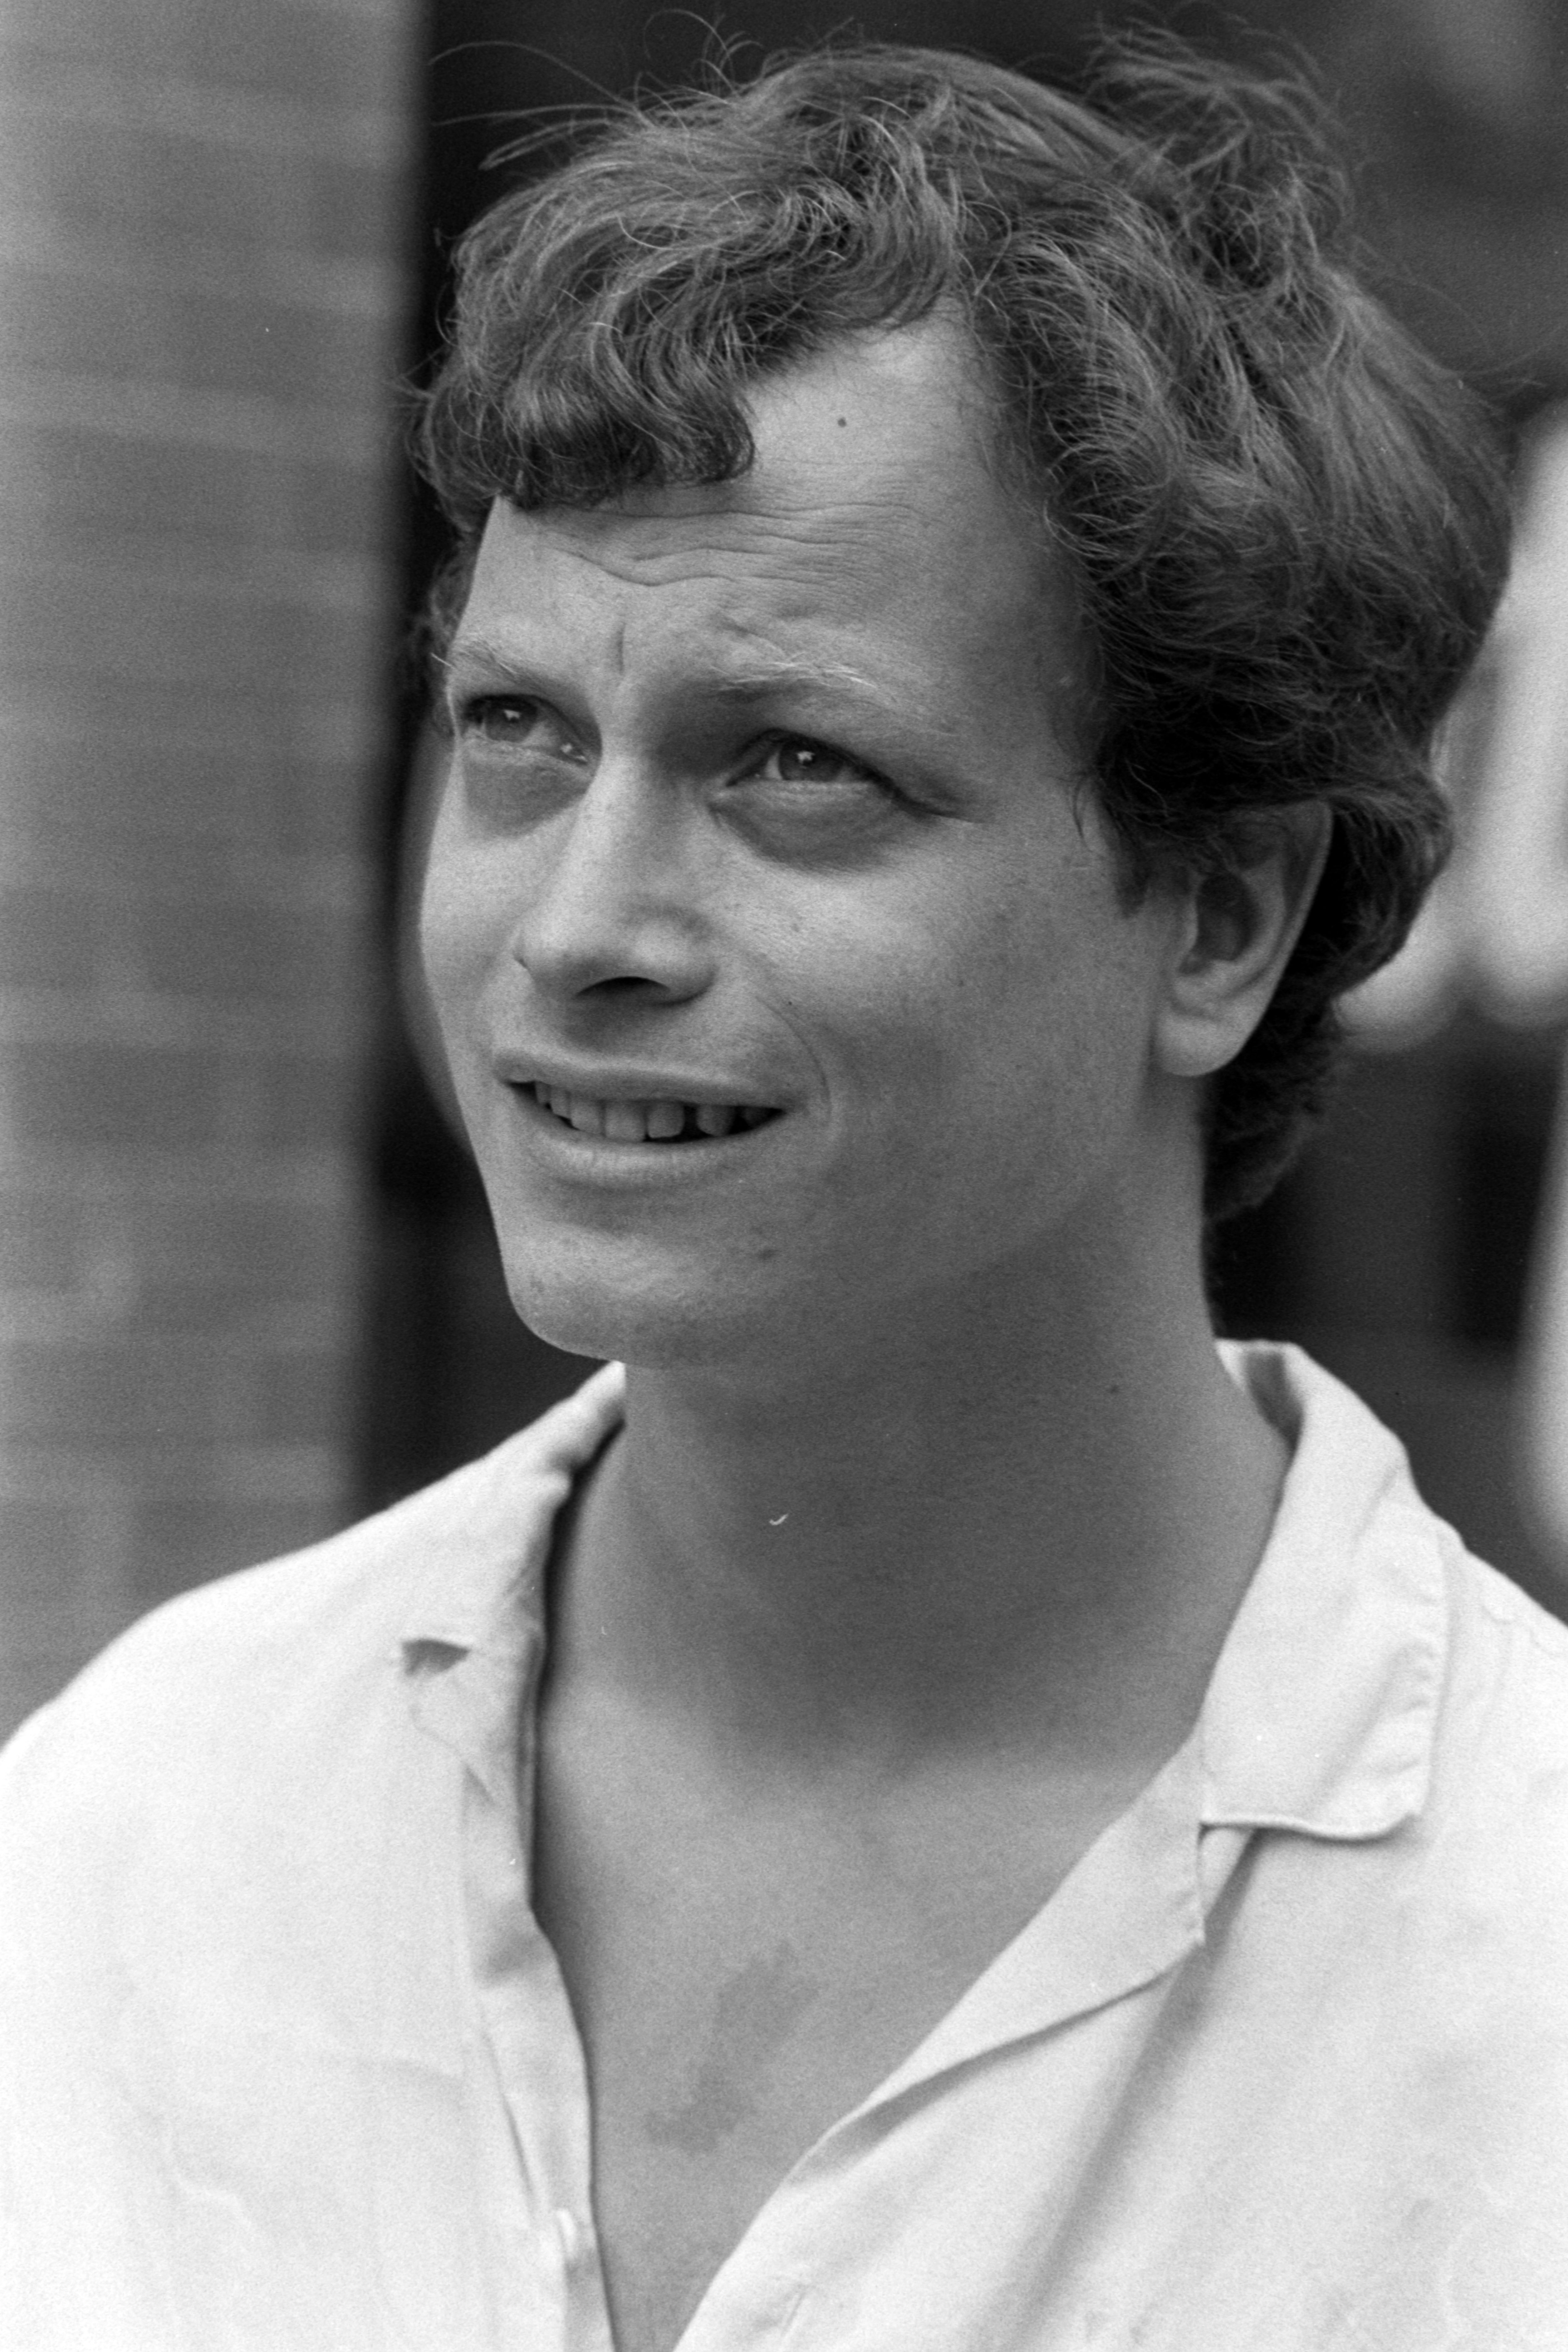 Gary Sinise in his younger days | Source: Getty Images